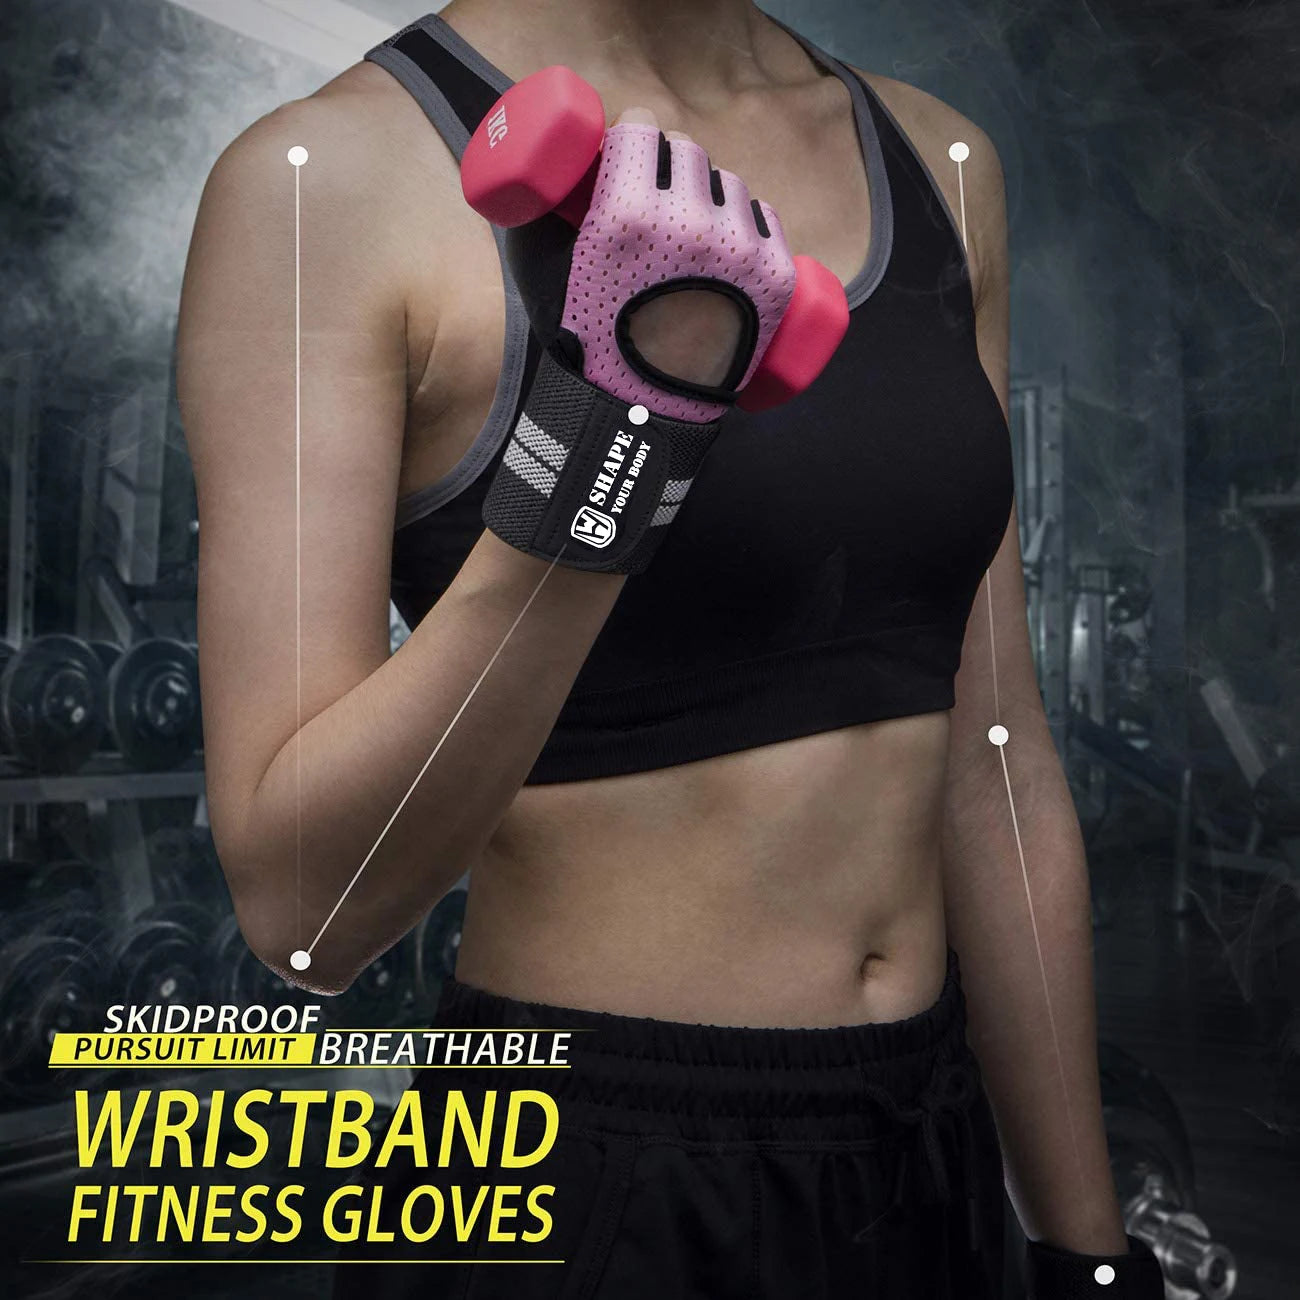 Workout Gloves Full Palm Protection for Gym, Cycling, Exercise, Breathable, Super Lightweight for Mens and Women